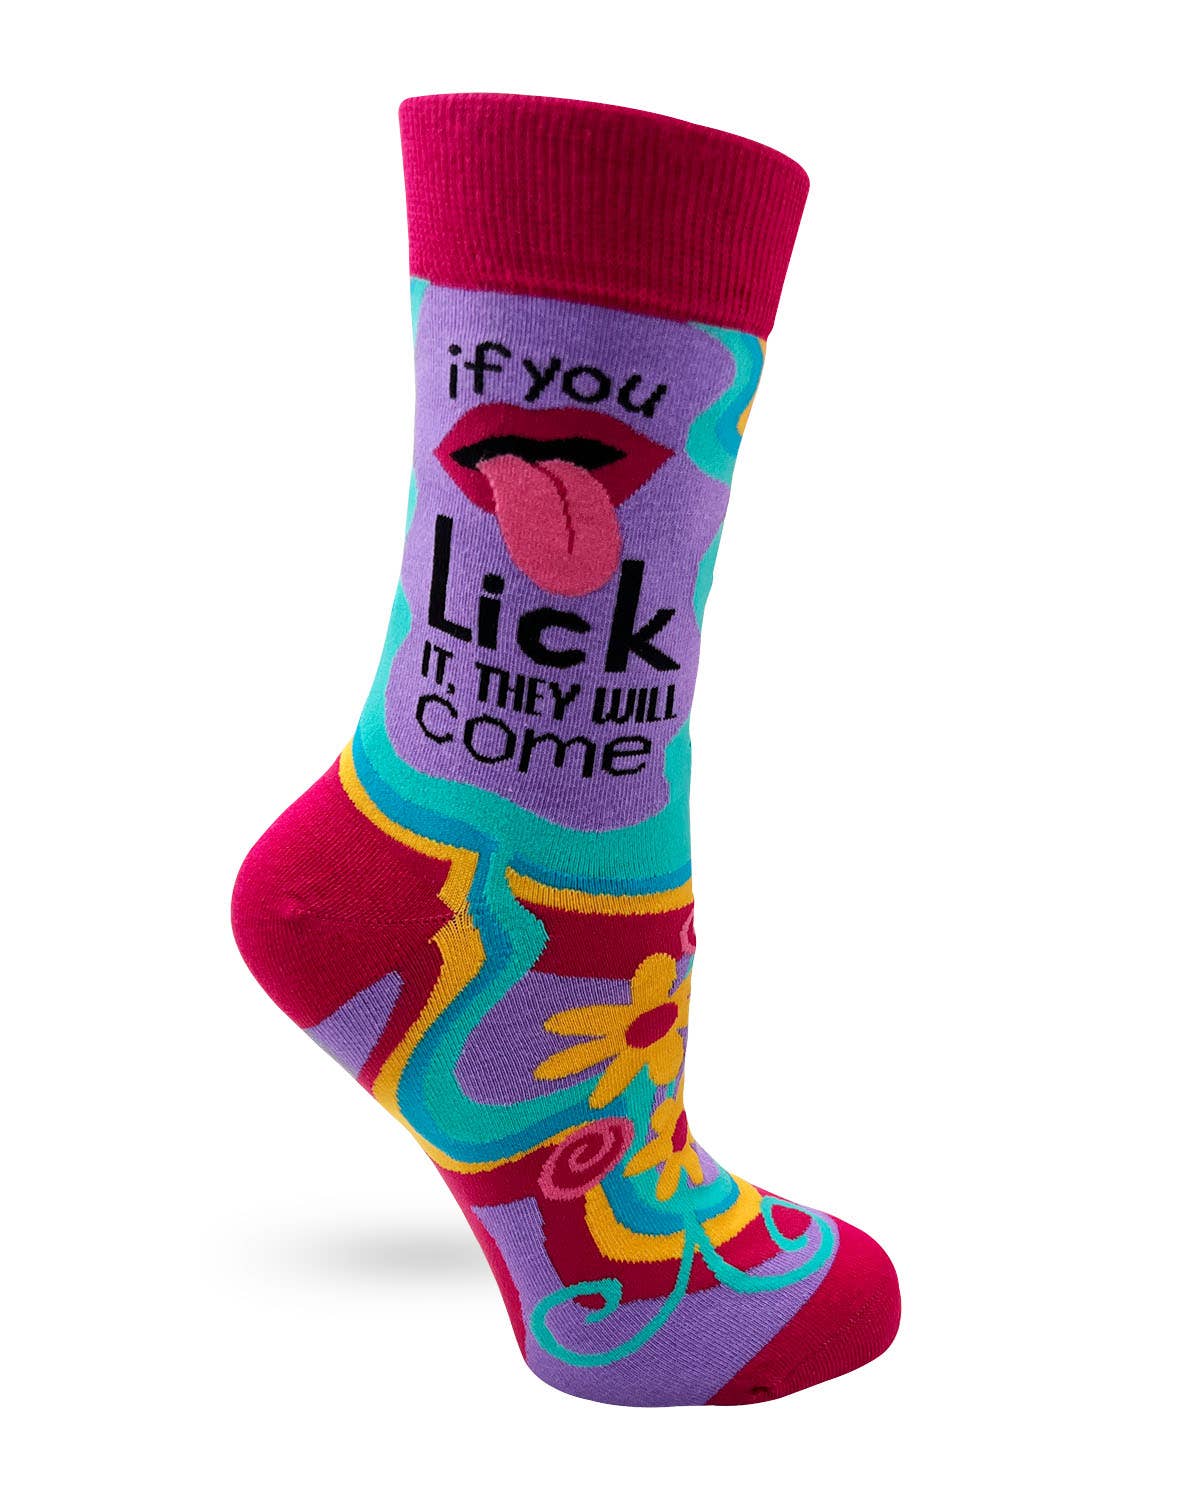 If You Lick it They Will Come Women's Crew Socks